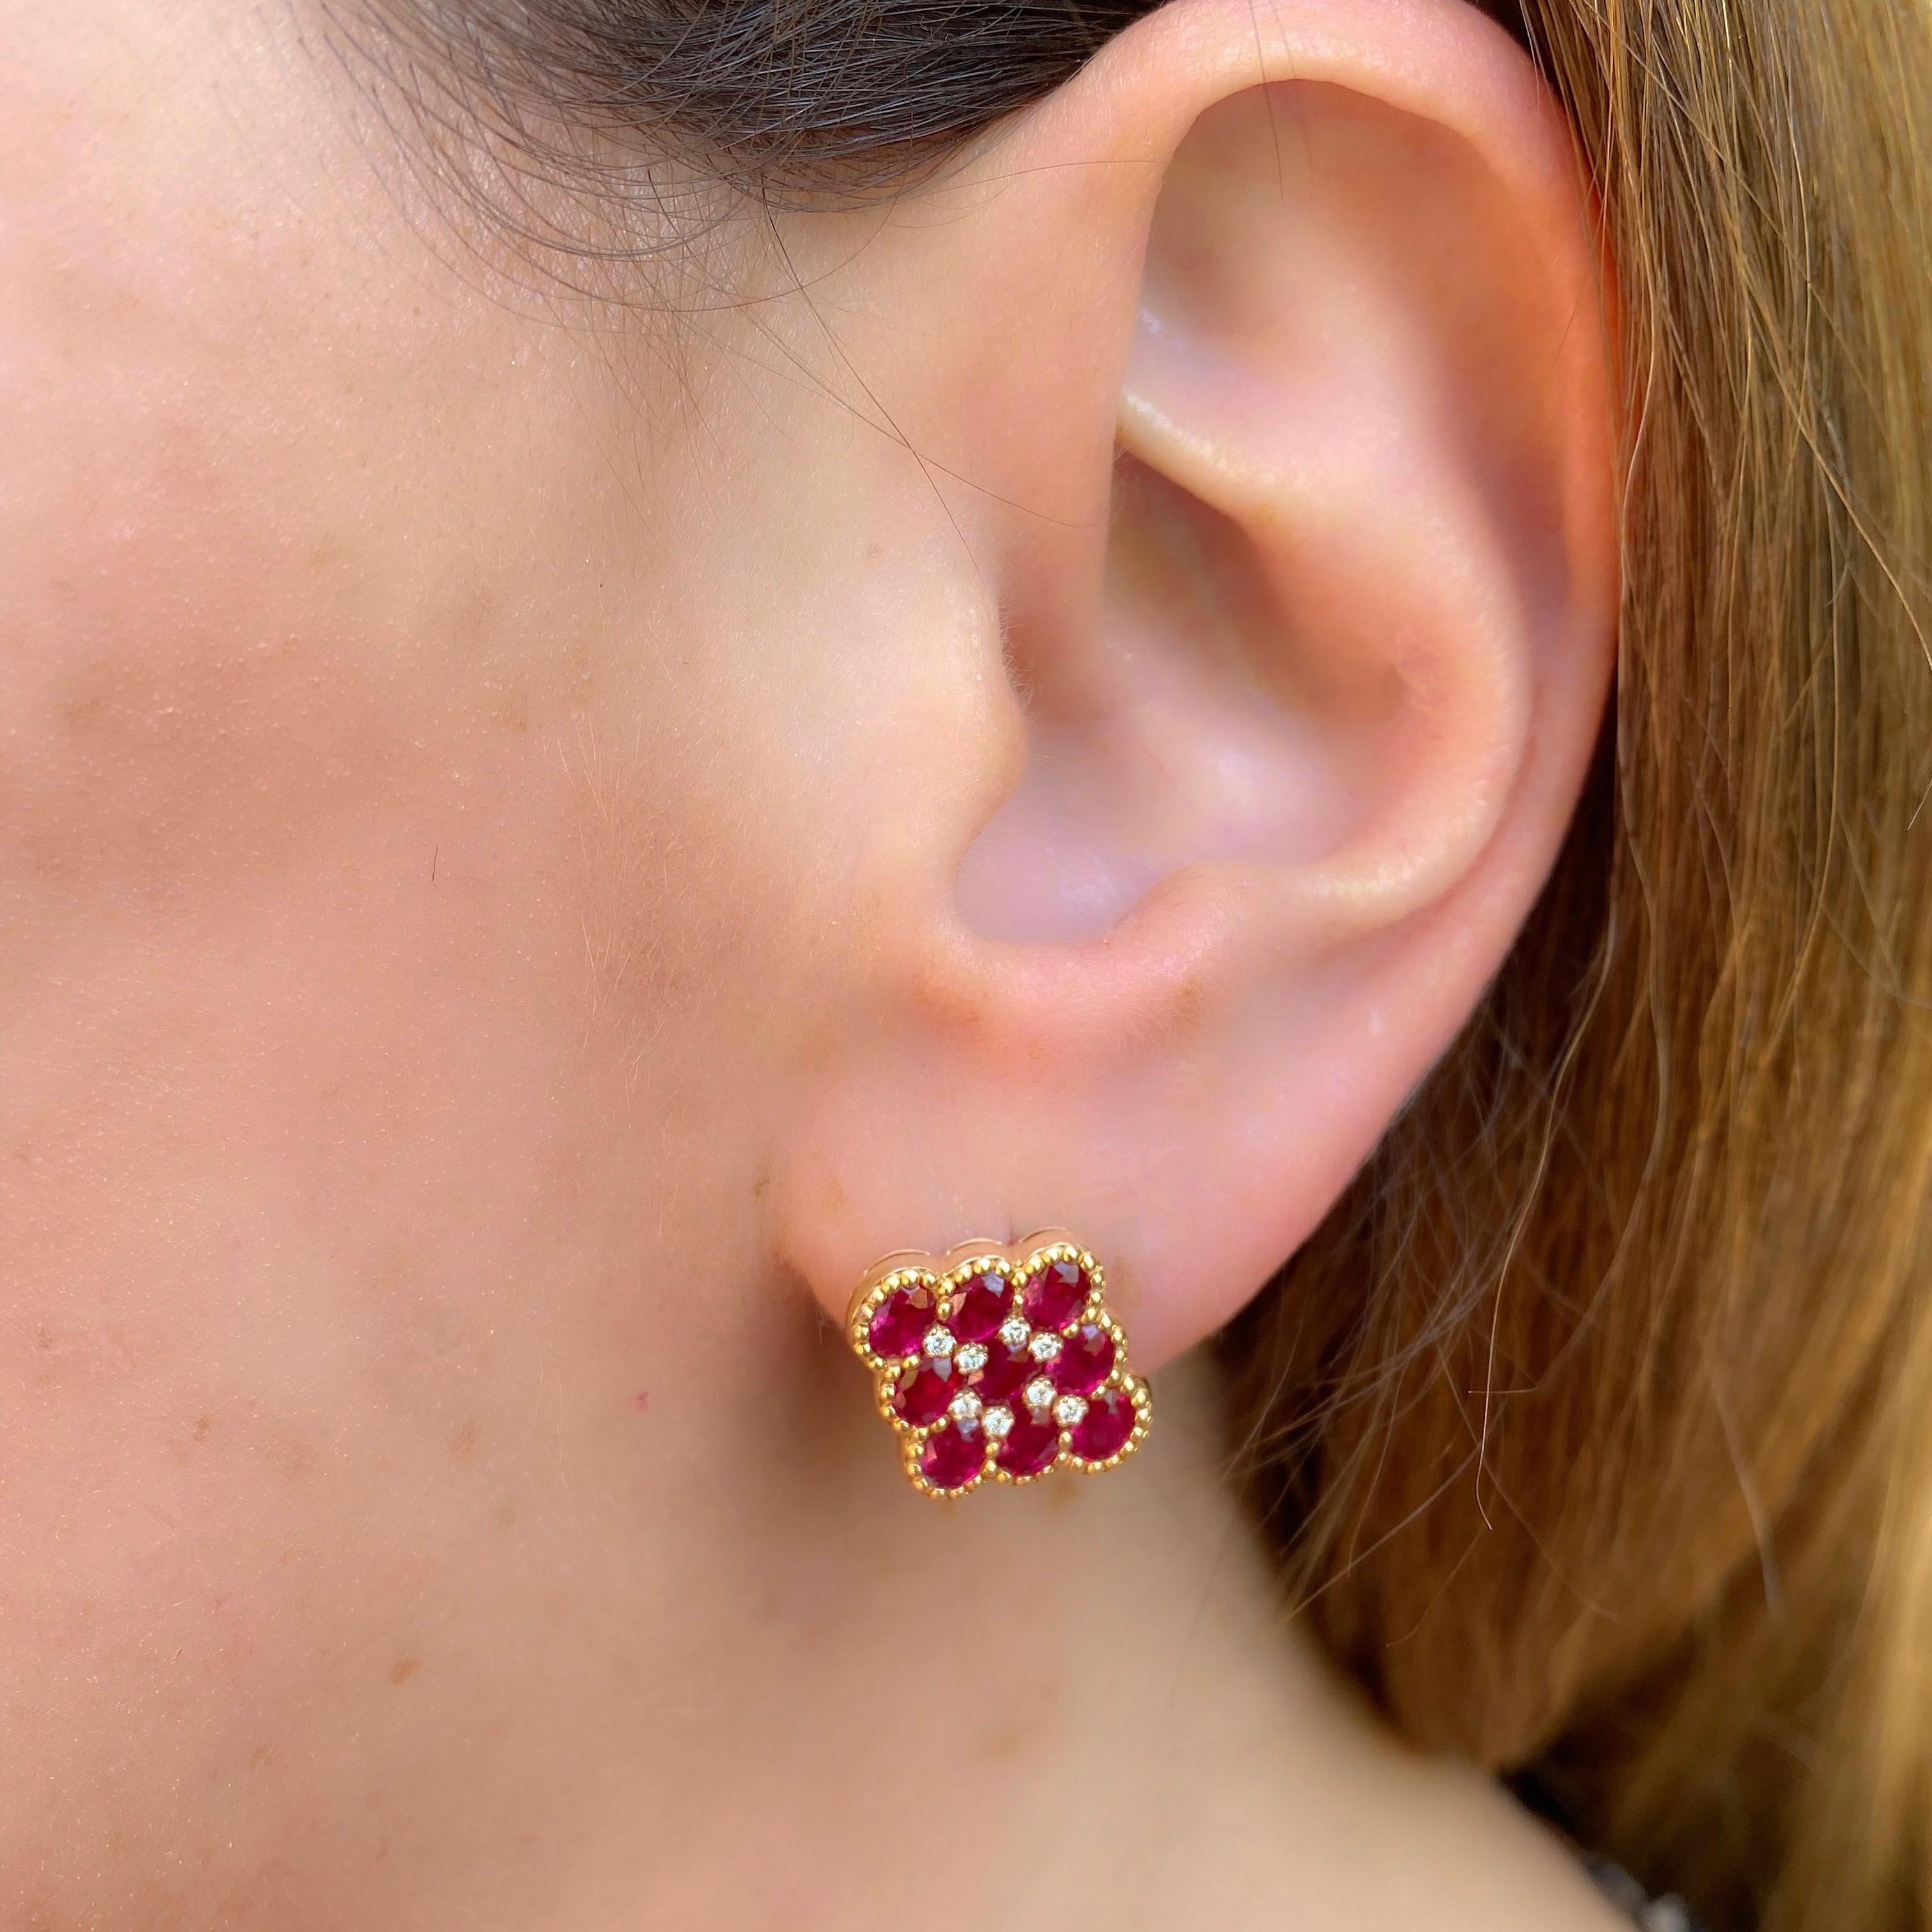 Vibrantly red, these 18k rose gold stud earrings are a unique find! The kite shaped posts are set with 18 oval-shaped rubies, deep red and well saturated, weighing in total 3.70 carats, and accented with 16 round brilliant-cut diamonds weighing